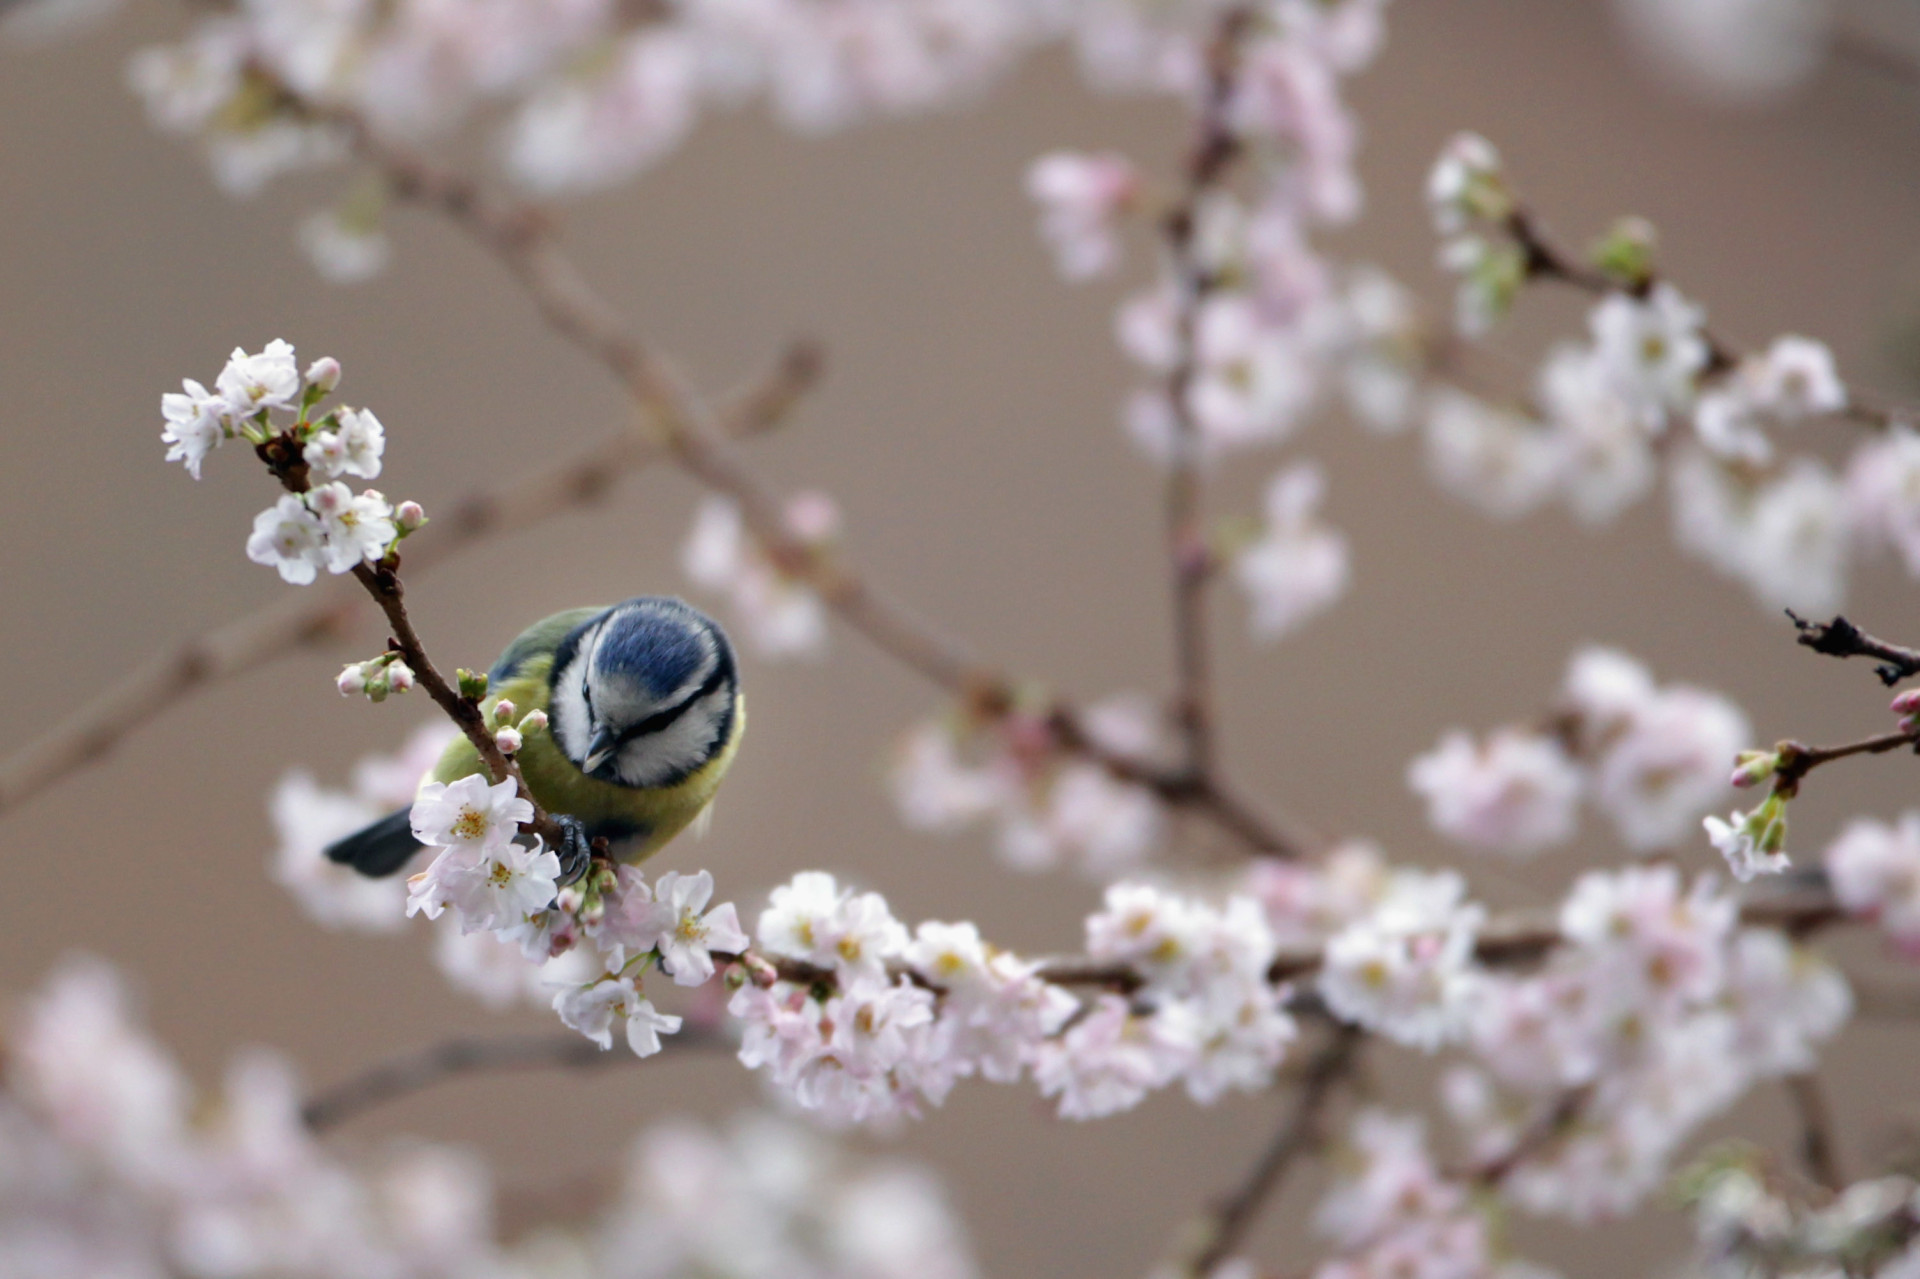 A blue tit collects early blossom petals to line its nests from a tree in Mayfair, London.